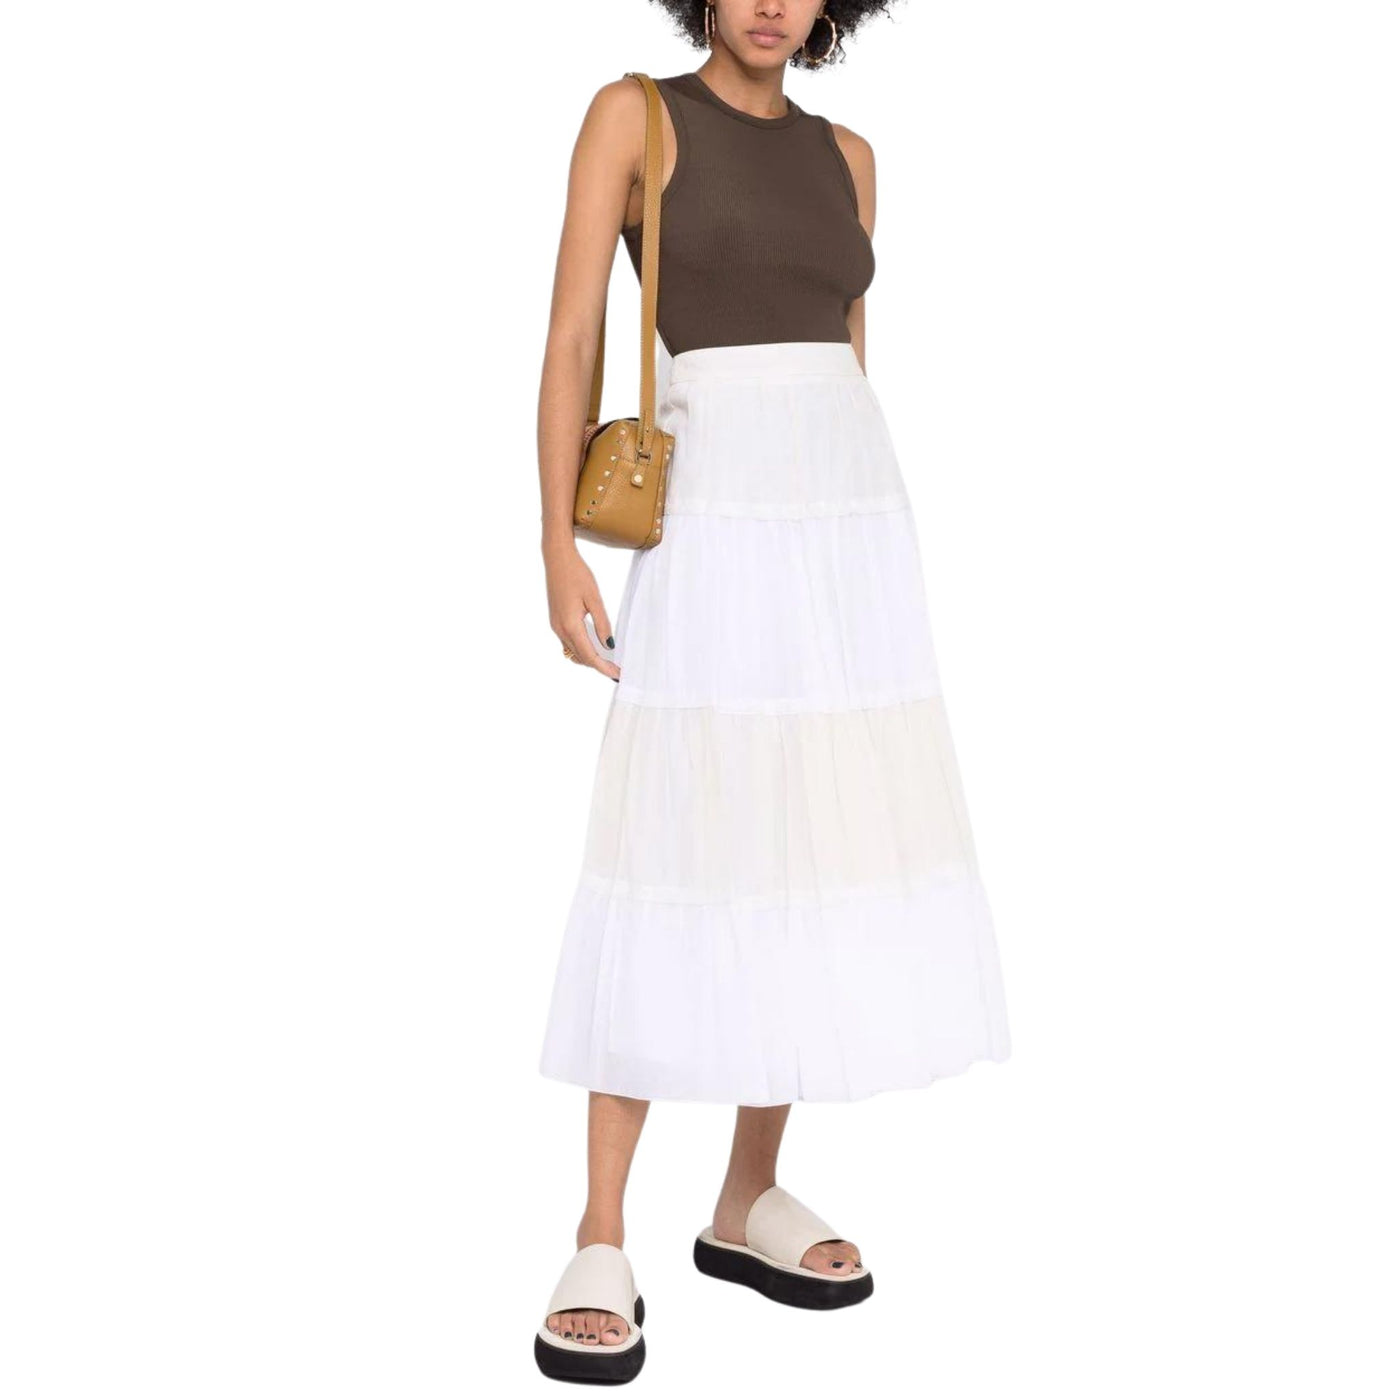 Women's skirt in high-waisted cotton with flounces